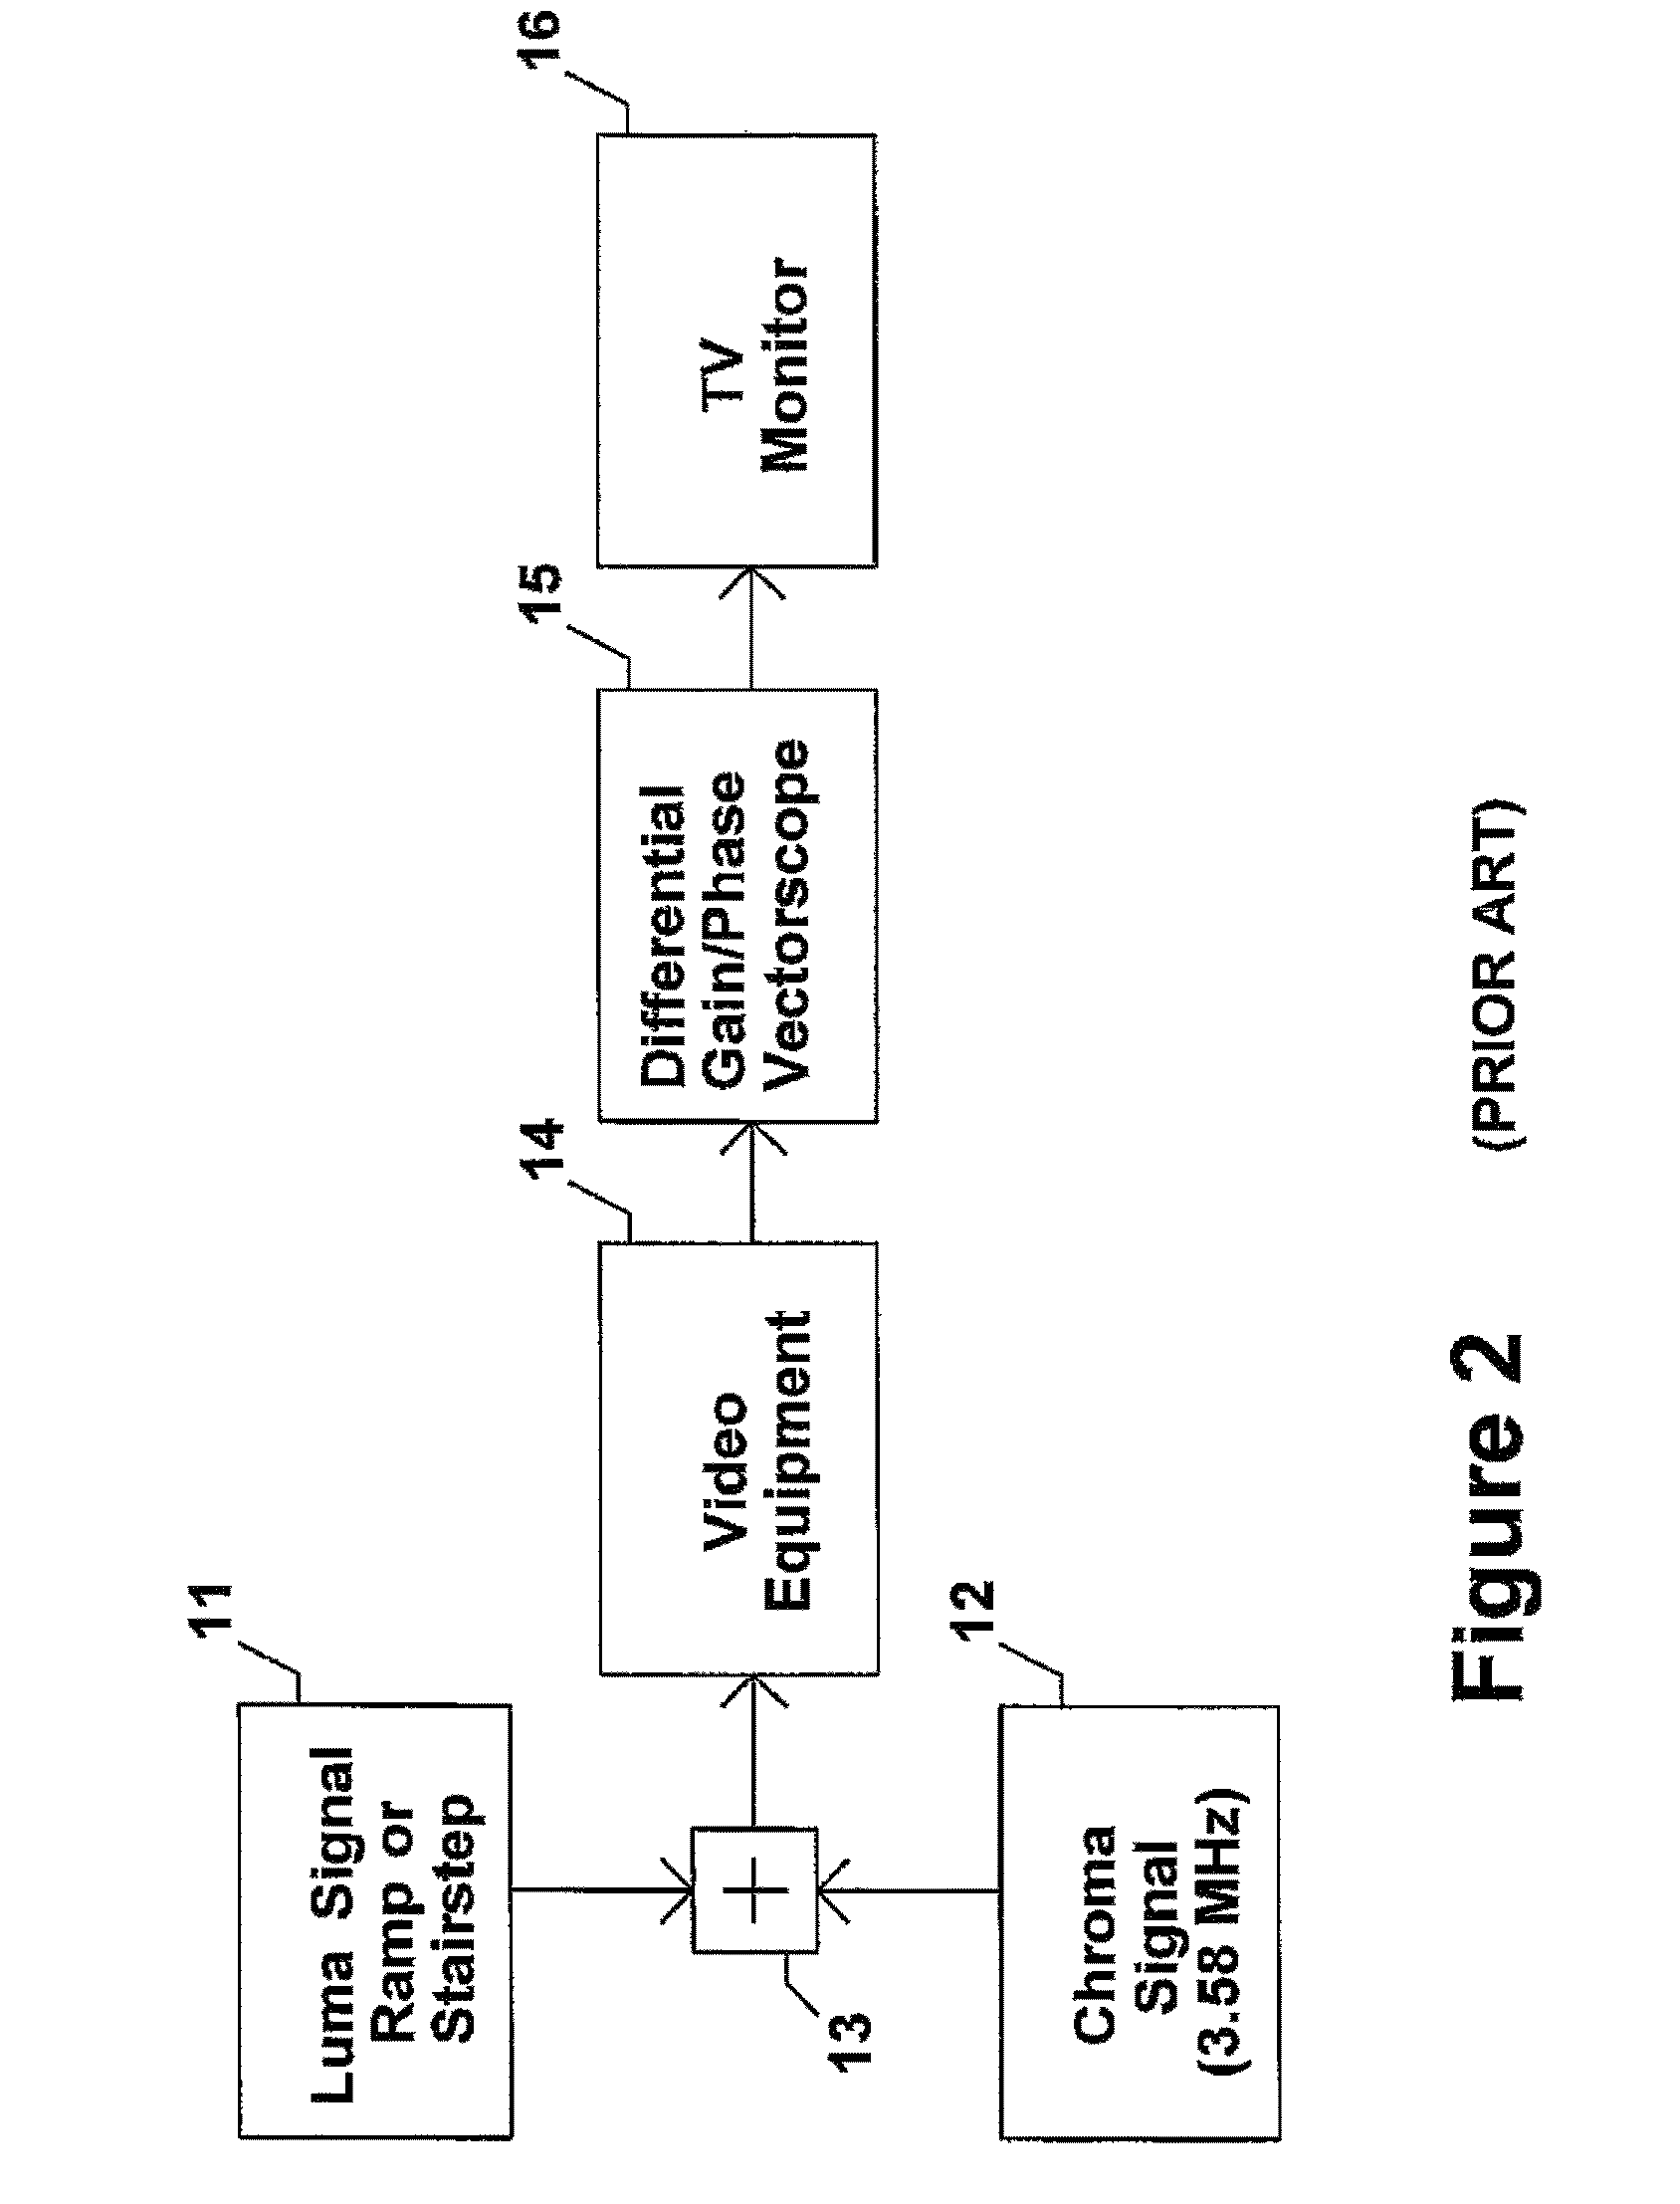 Method and apparatus to evaluate audio equipment via filter banks